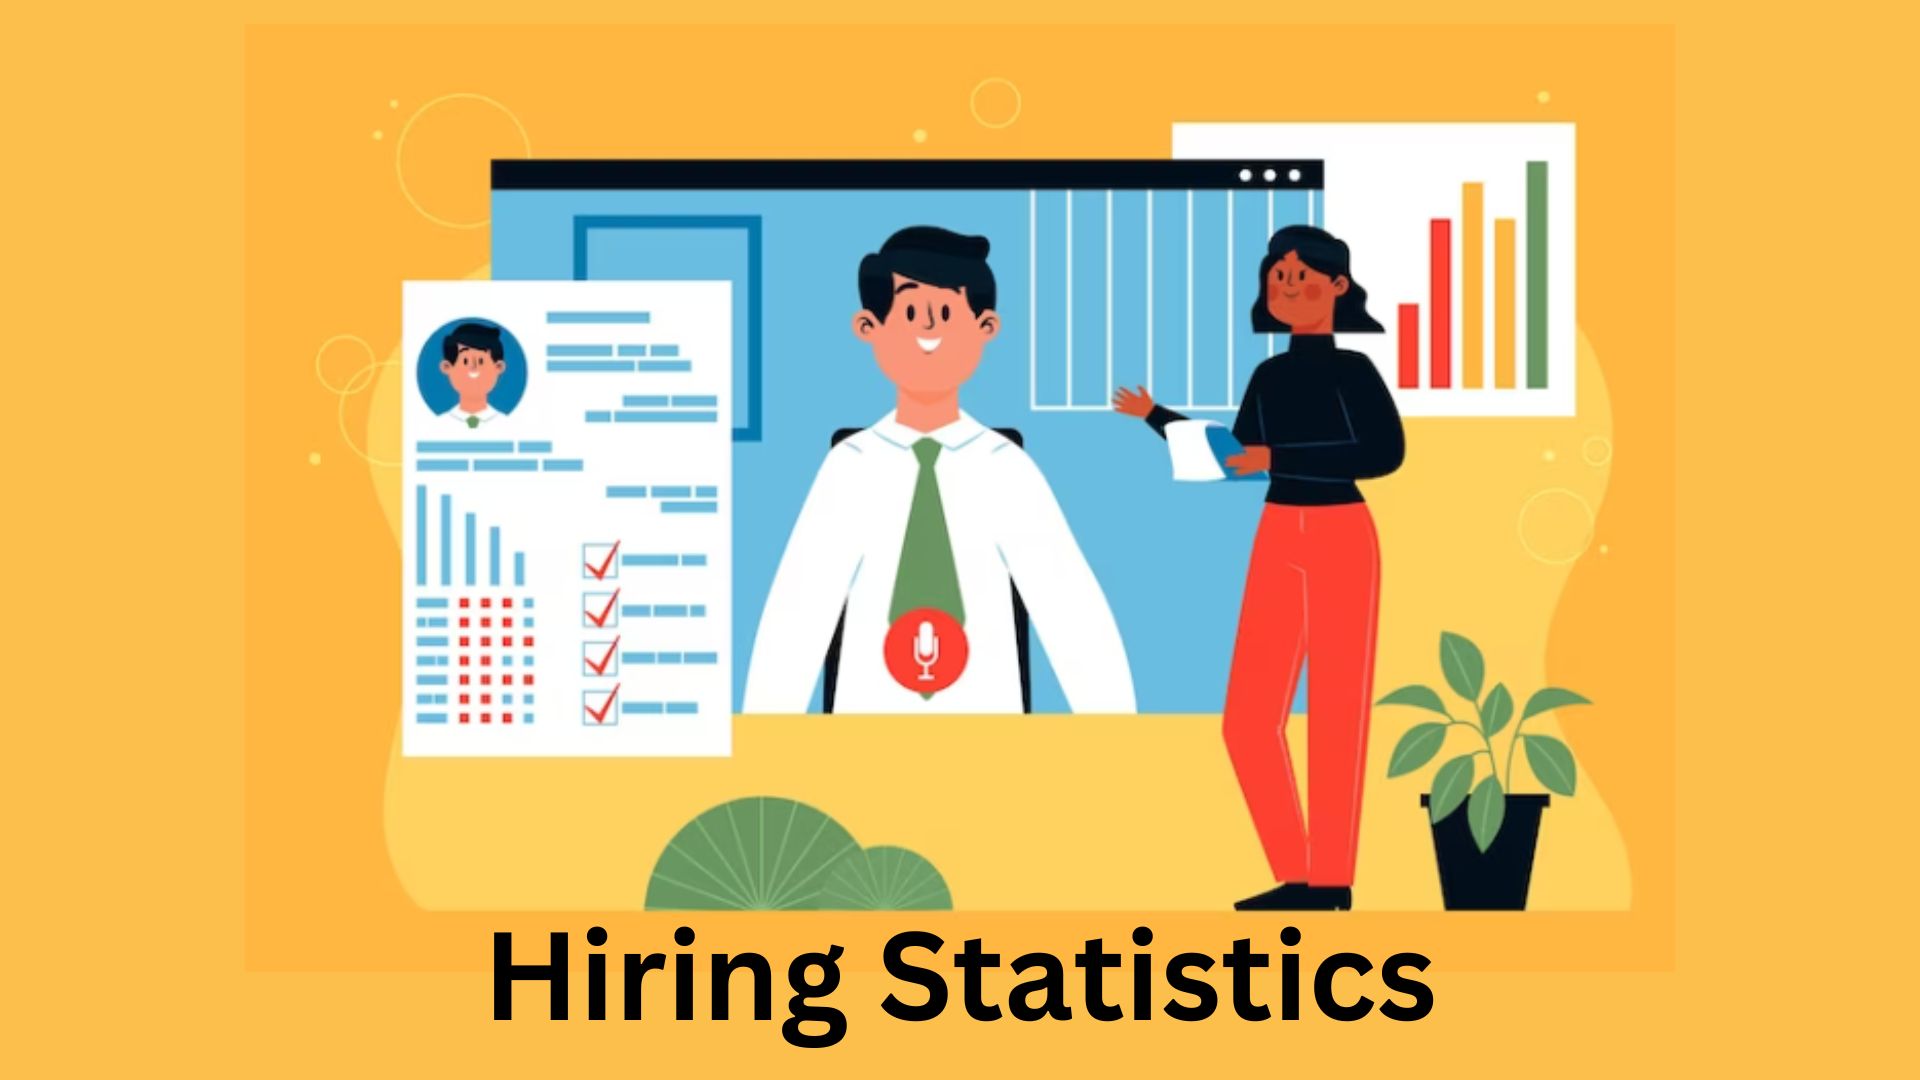 Hiring Statistics By Remote Hiring, Jobs and Career, Communication, Diversity, Equity and Inclusion